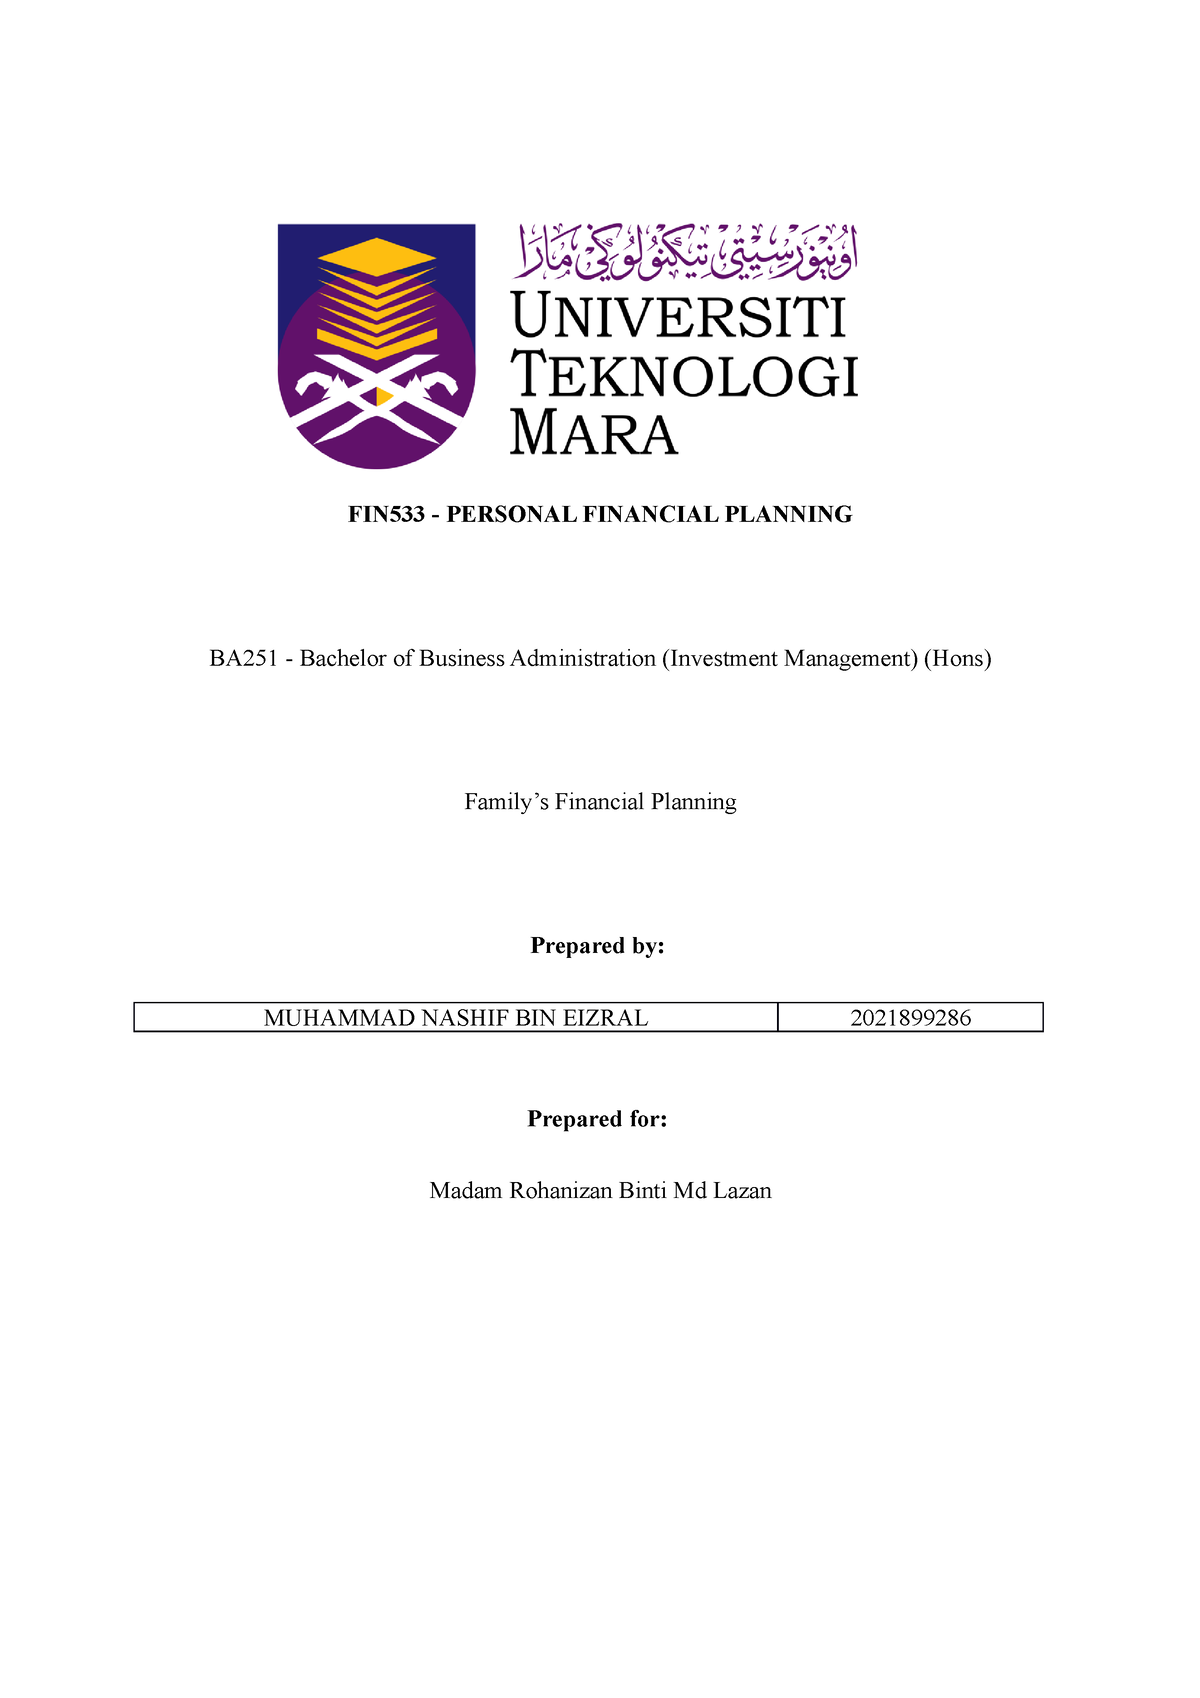 fin533 individual assignment uitm